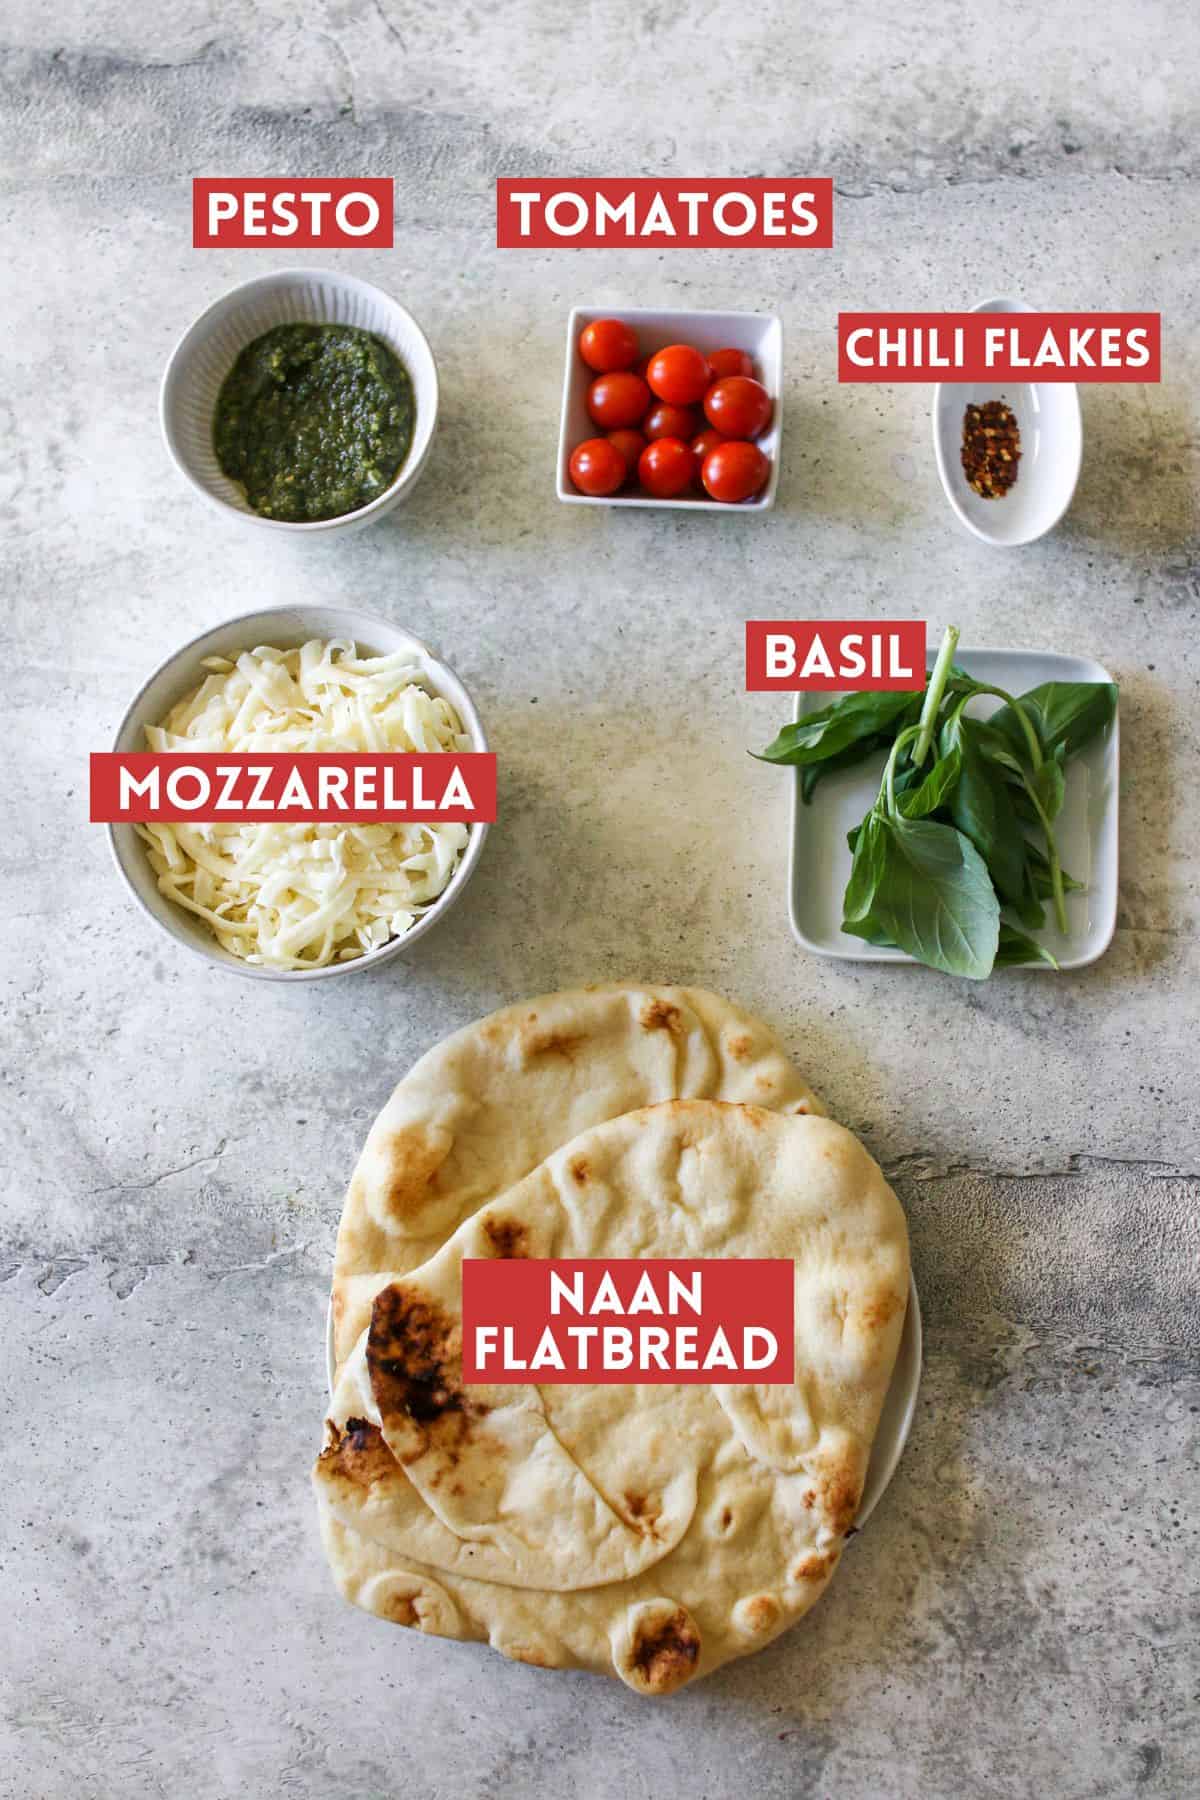 Pesto Naan pizza ingredients separated into individual white bowls or plates. Each item is labeled with a dark red rectangle box with white text in all caps. Everything sits on a cement background.